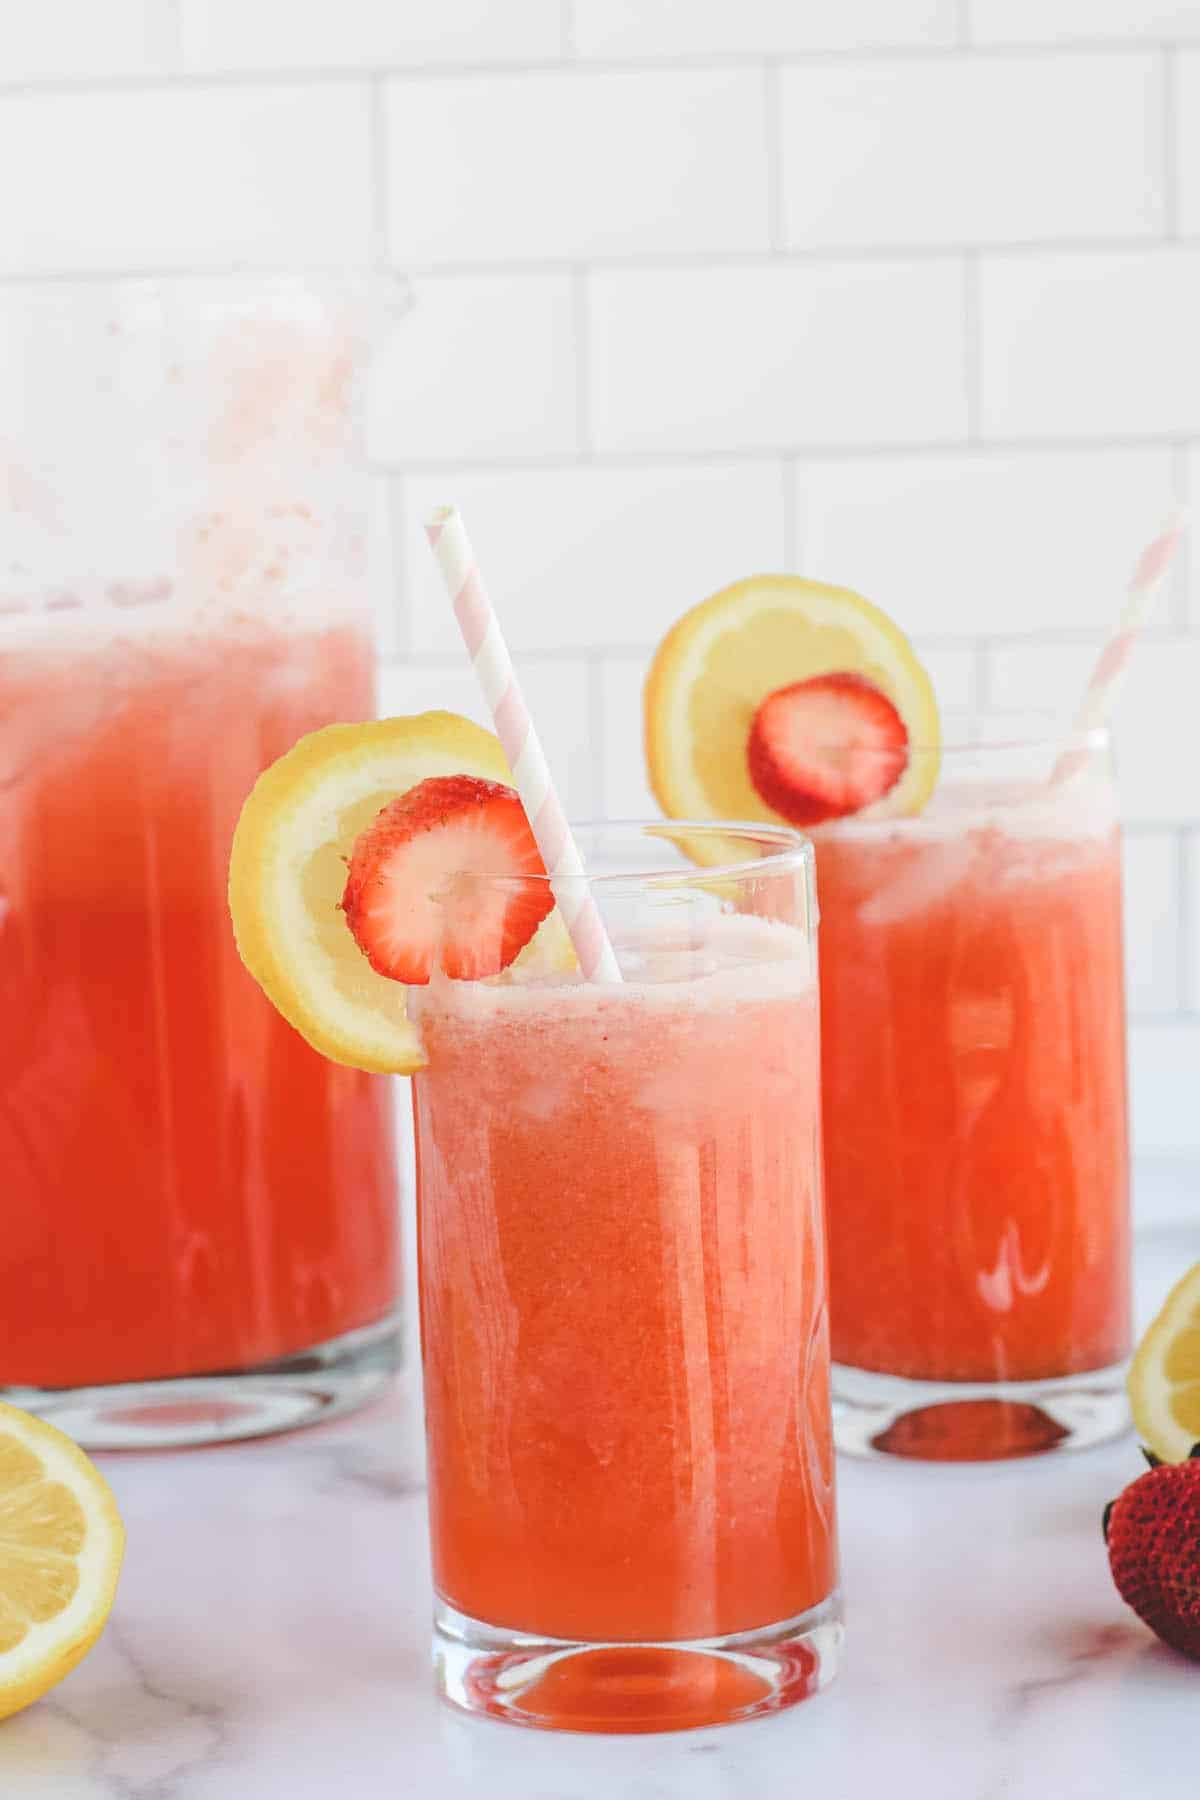 glasses of strawberry lemonade with lemon and strawberry garnishes and paper straws.